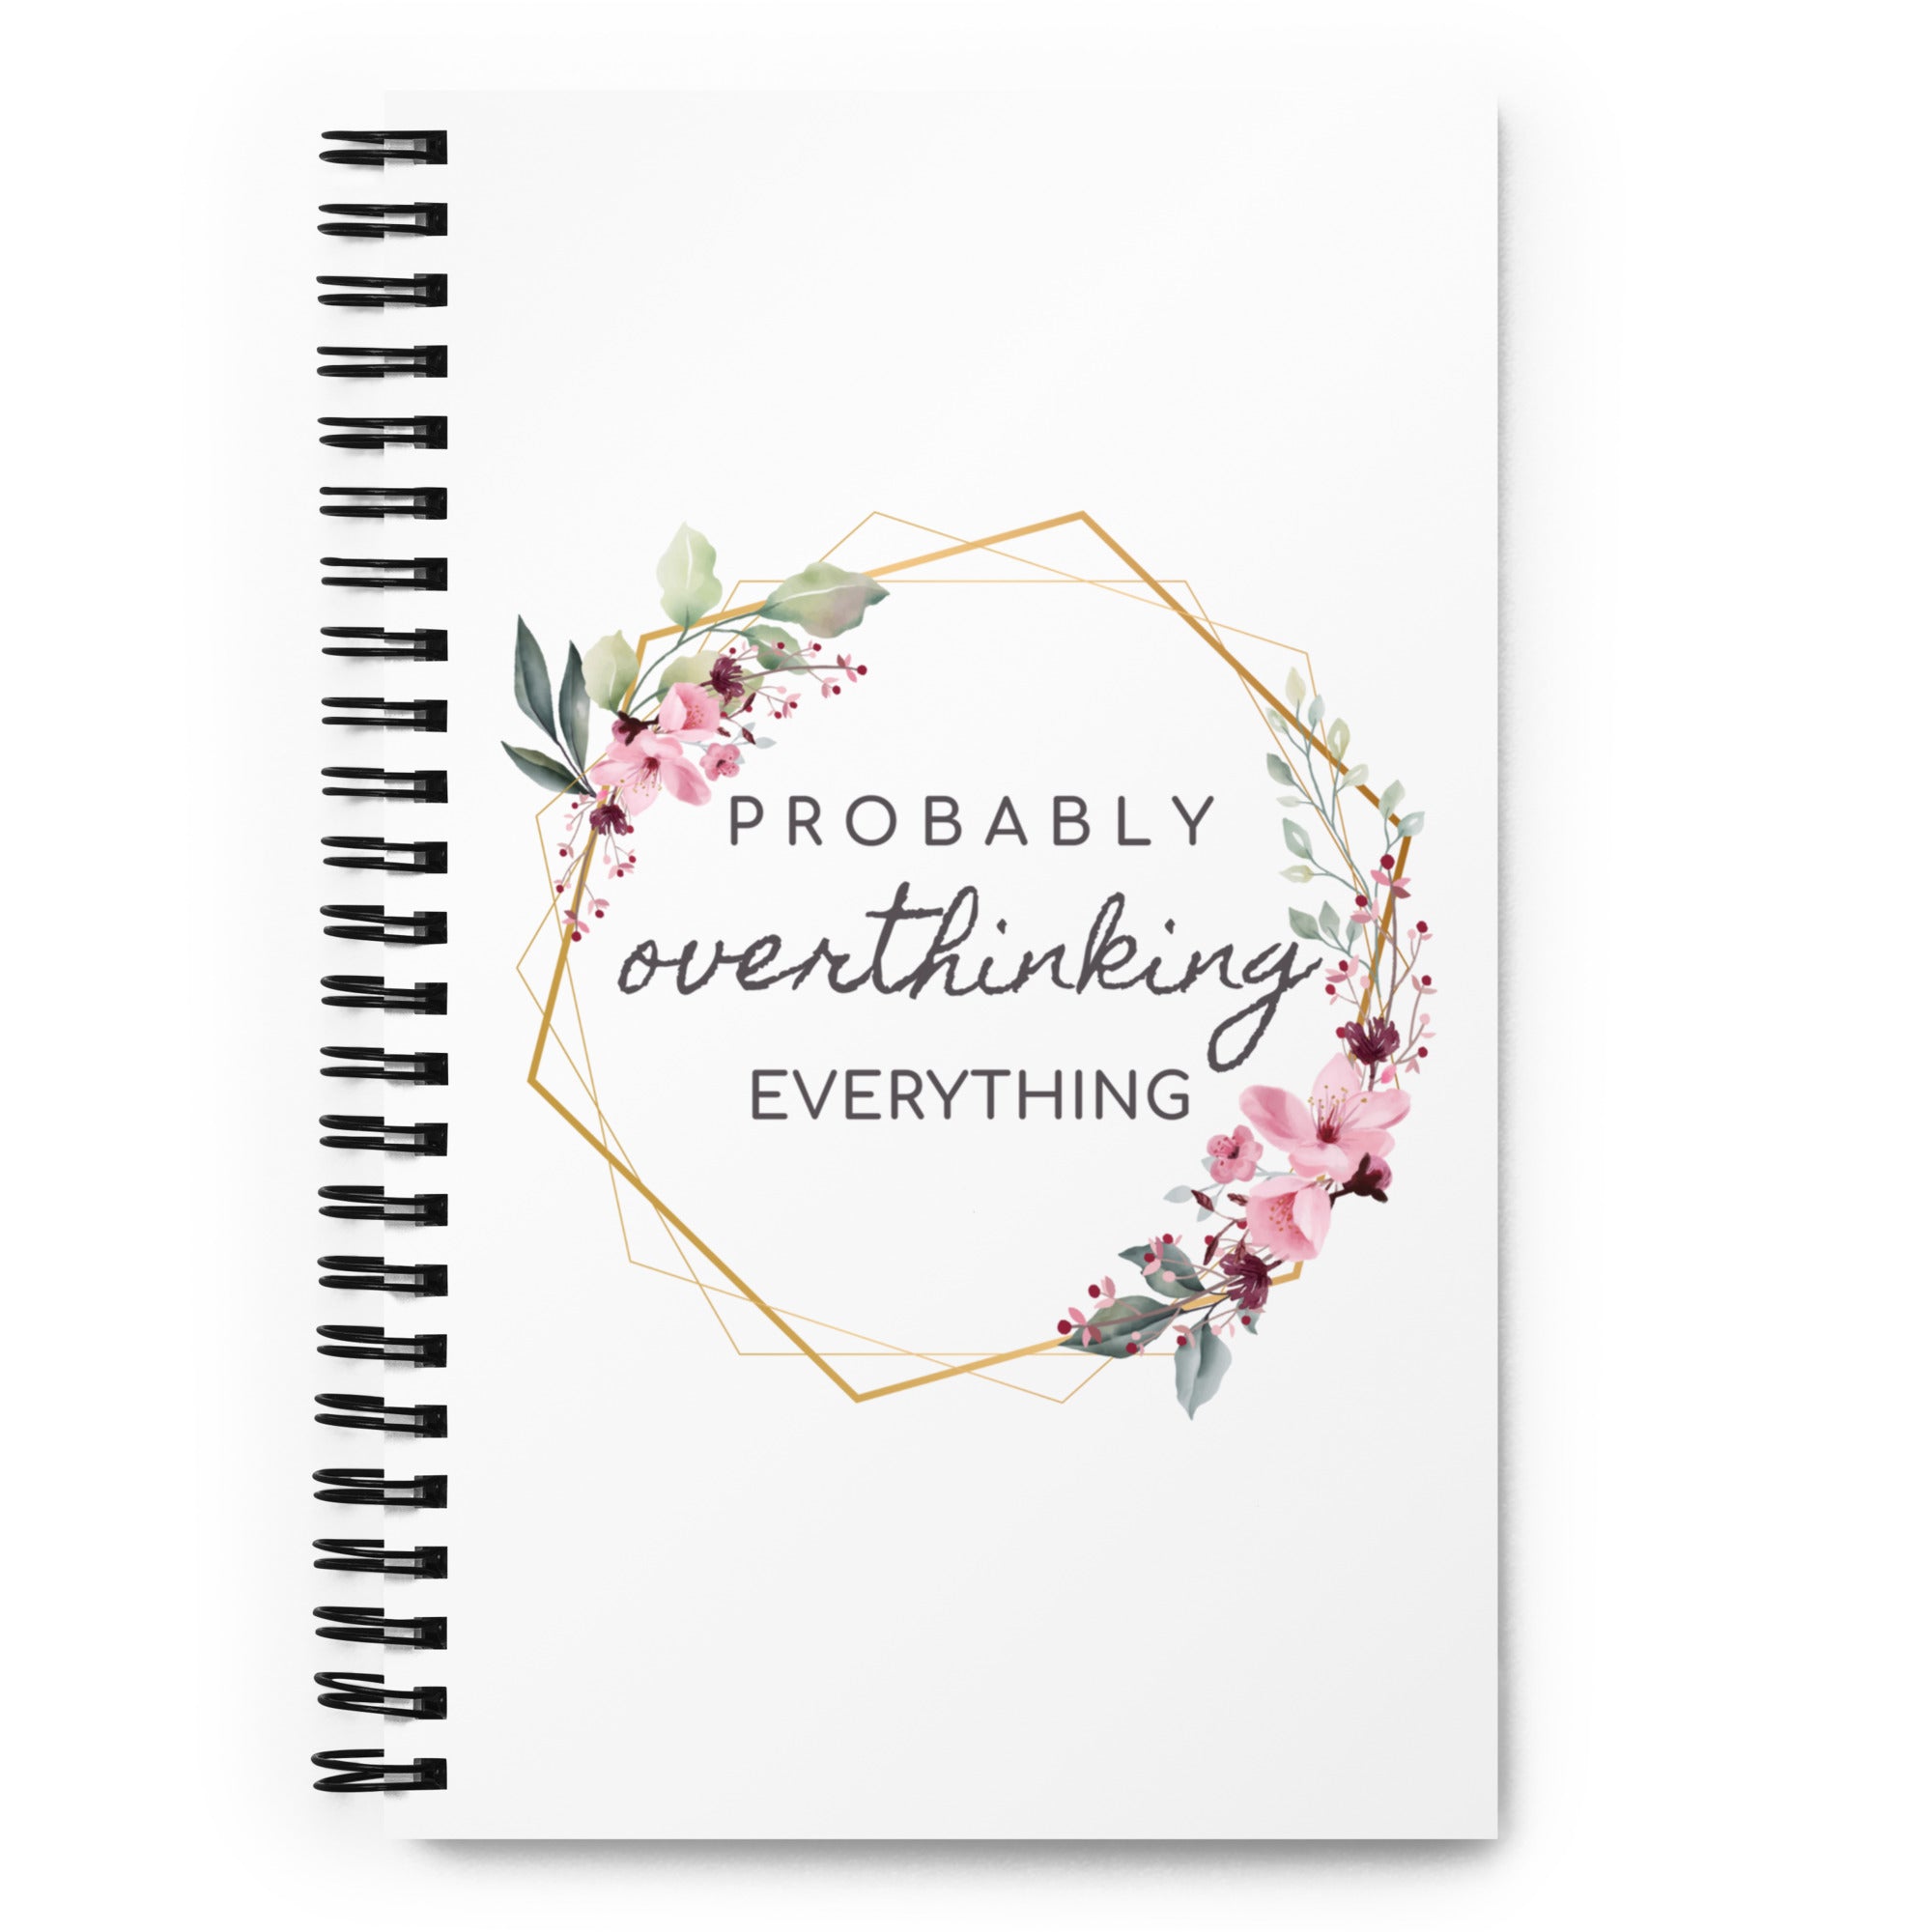 Probably Overthinking Everything - Spiral Notebook